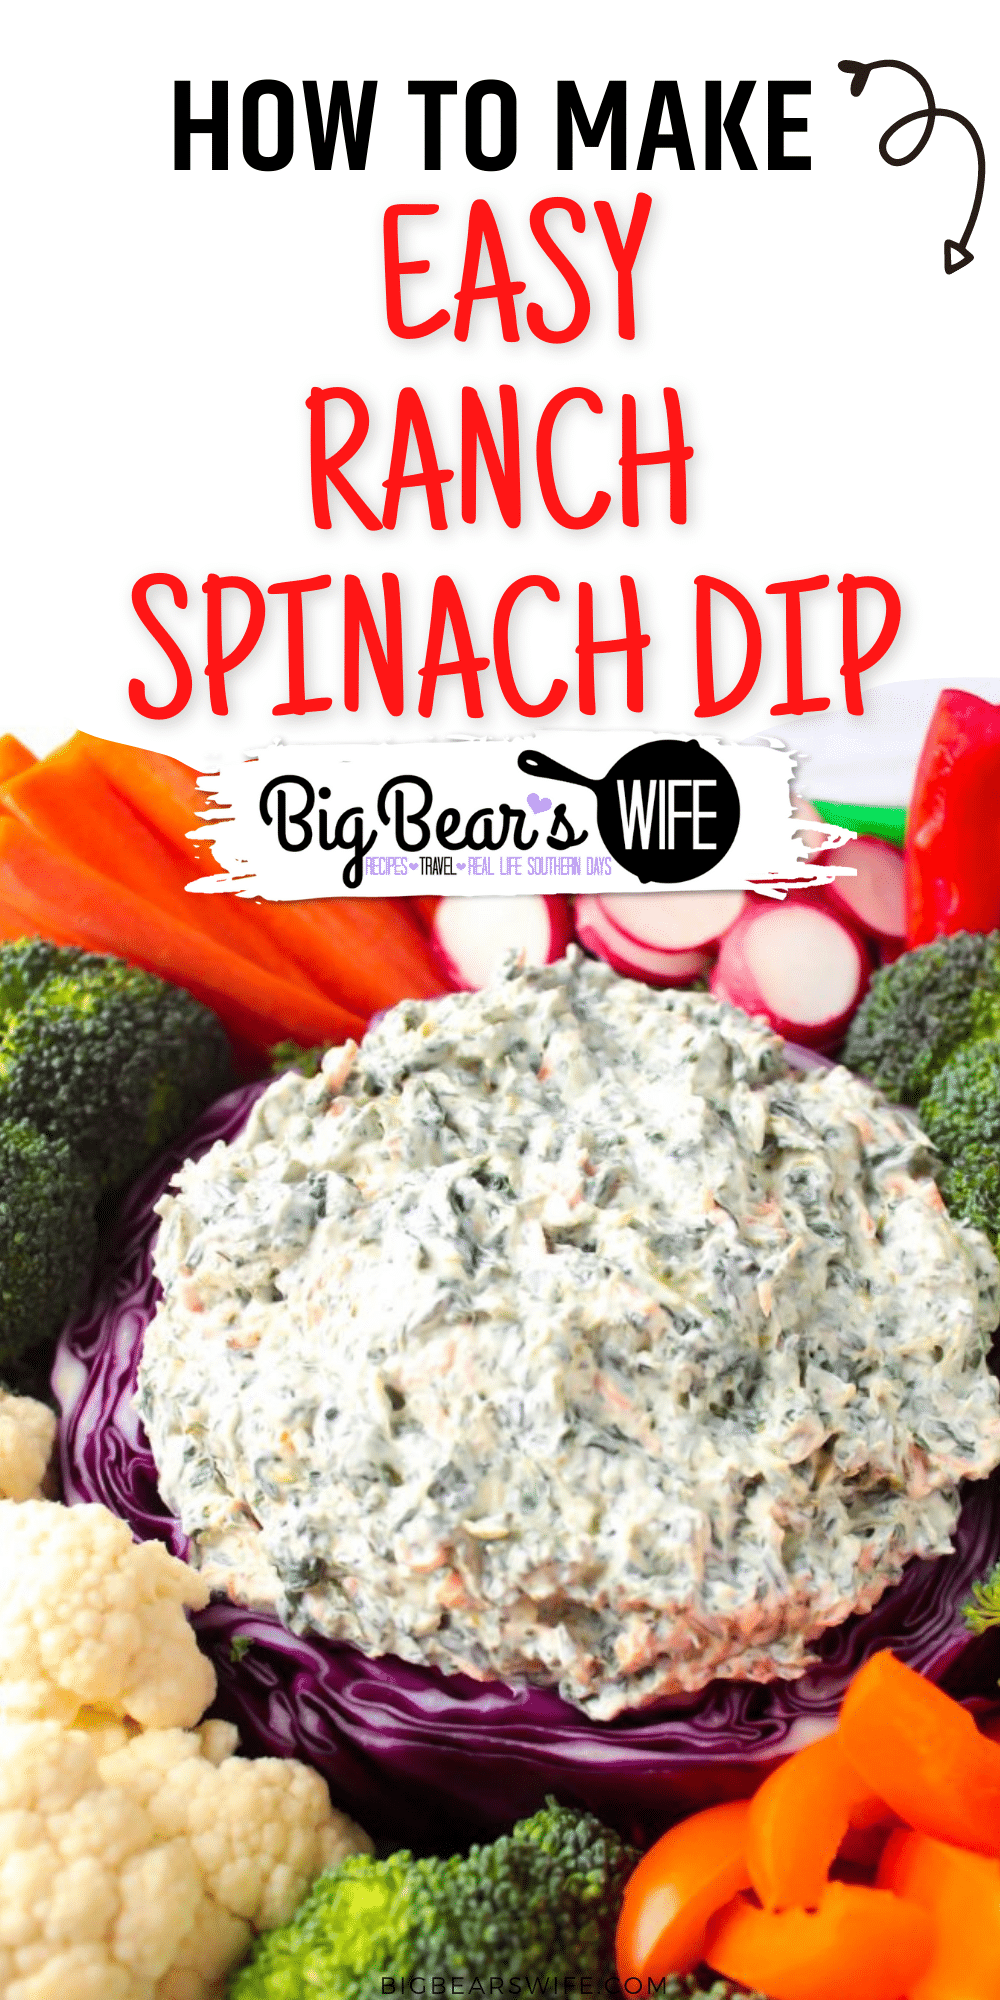 I’m so excited to share this Ranch Spinach Dip and cute vegetable tray idea with y’all. This dip is so tasty and the presentation turns a boring veggie tray into a super cute appetizer!

 via @bigbearswife